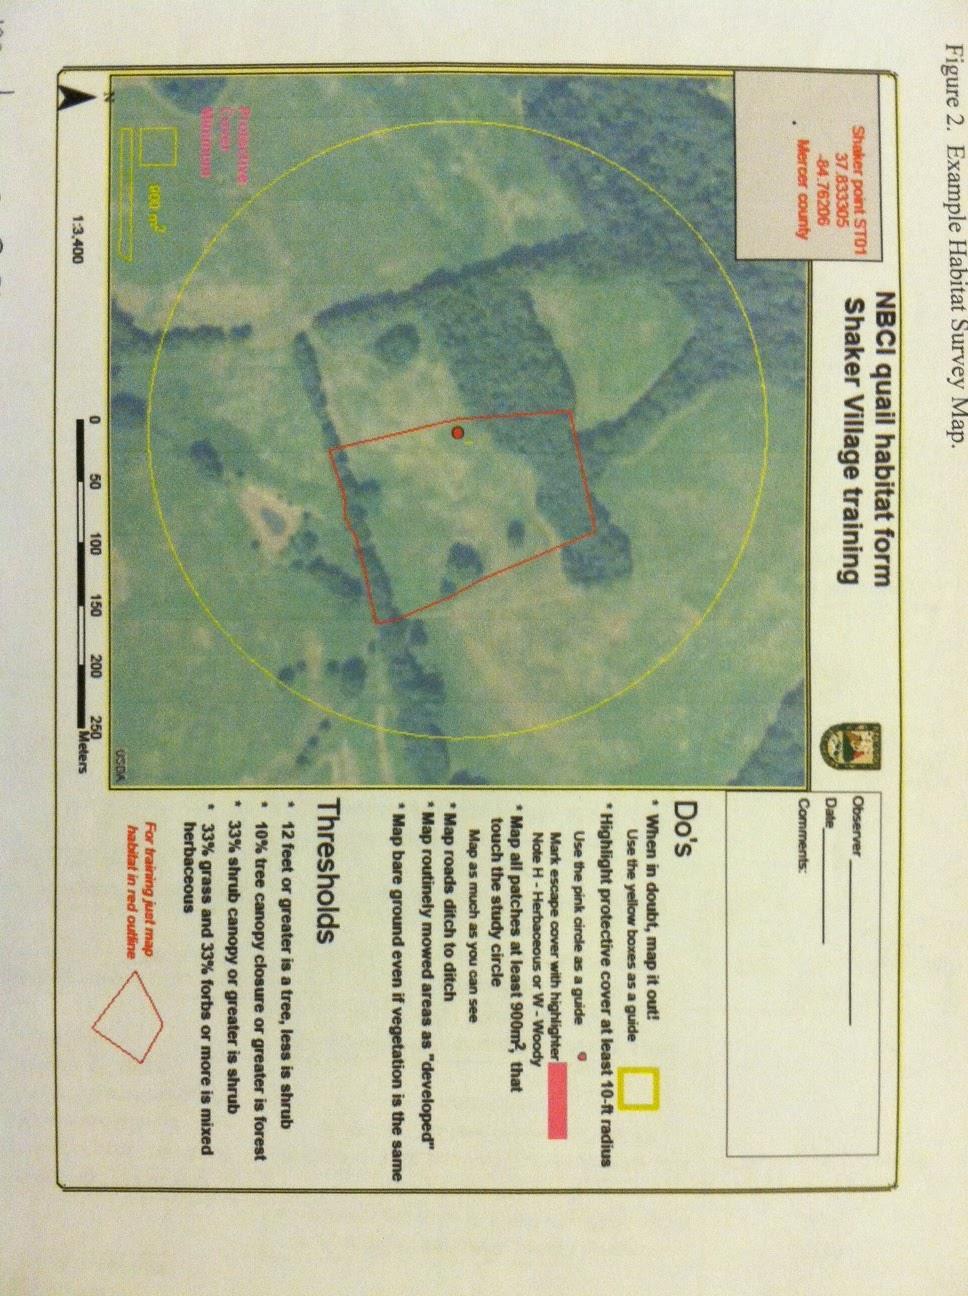 Example of Habitat Survey Map from NBCI s